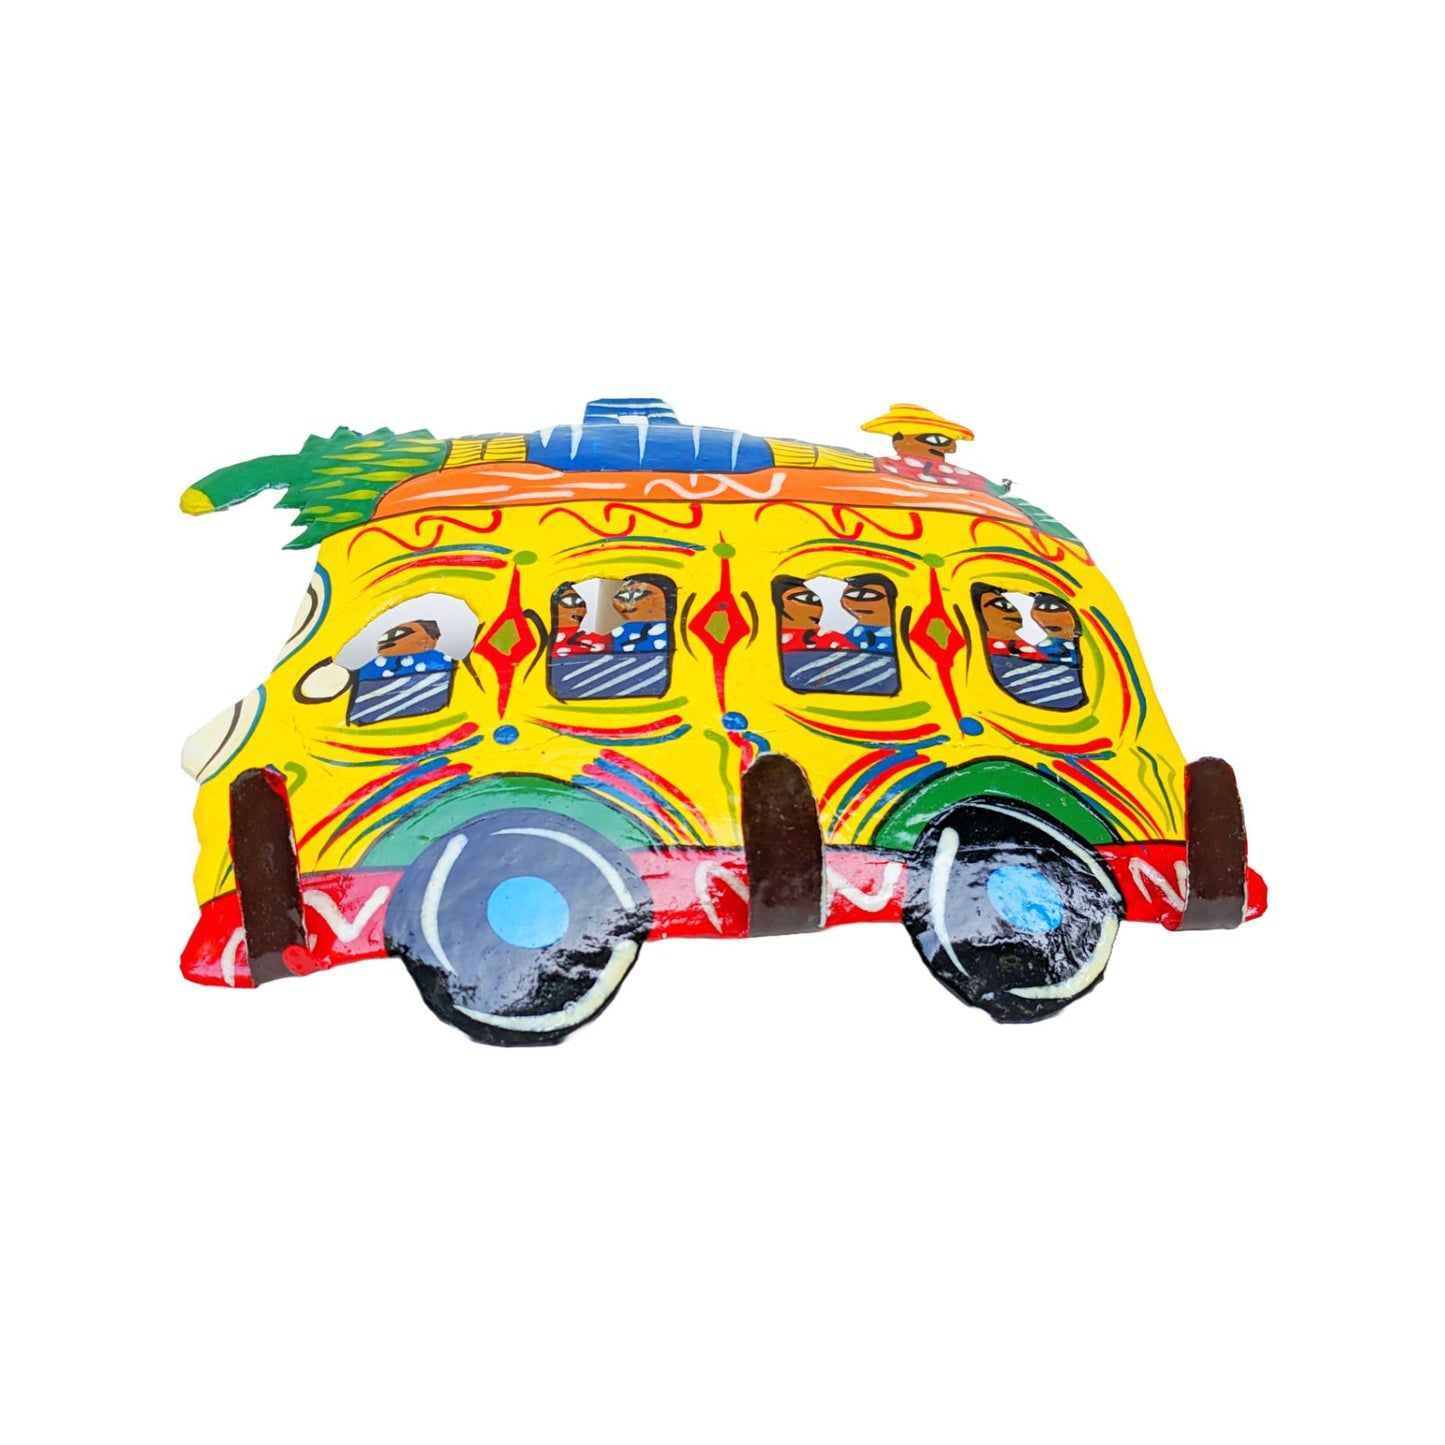 Vinatage Haitian Art Metal Tap Tap Bus with Hooks For Keys, Hats, And other Items